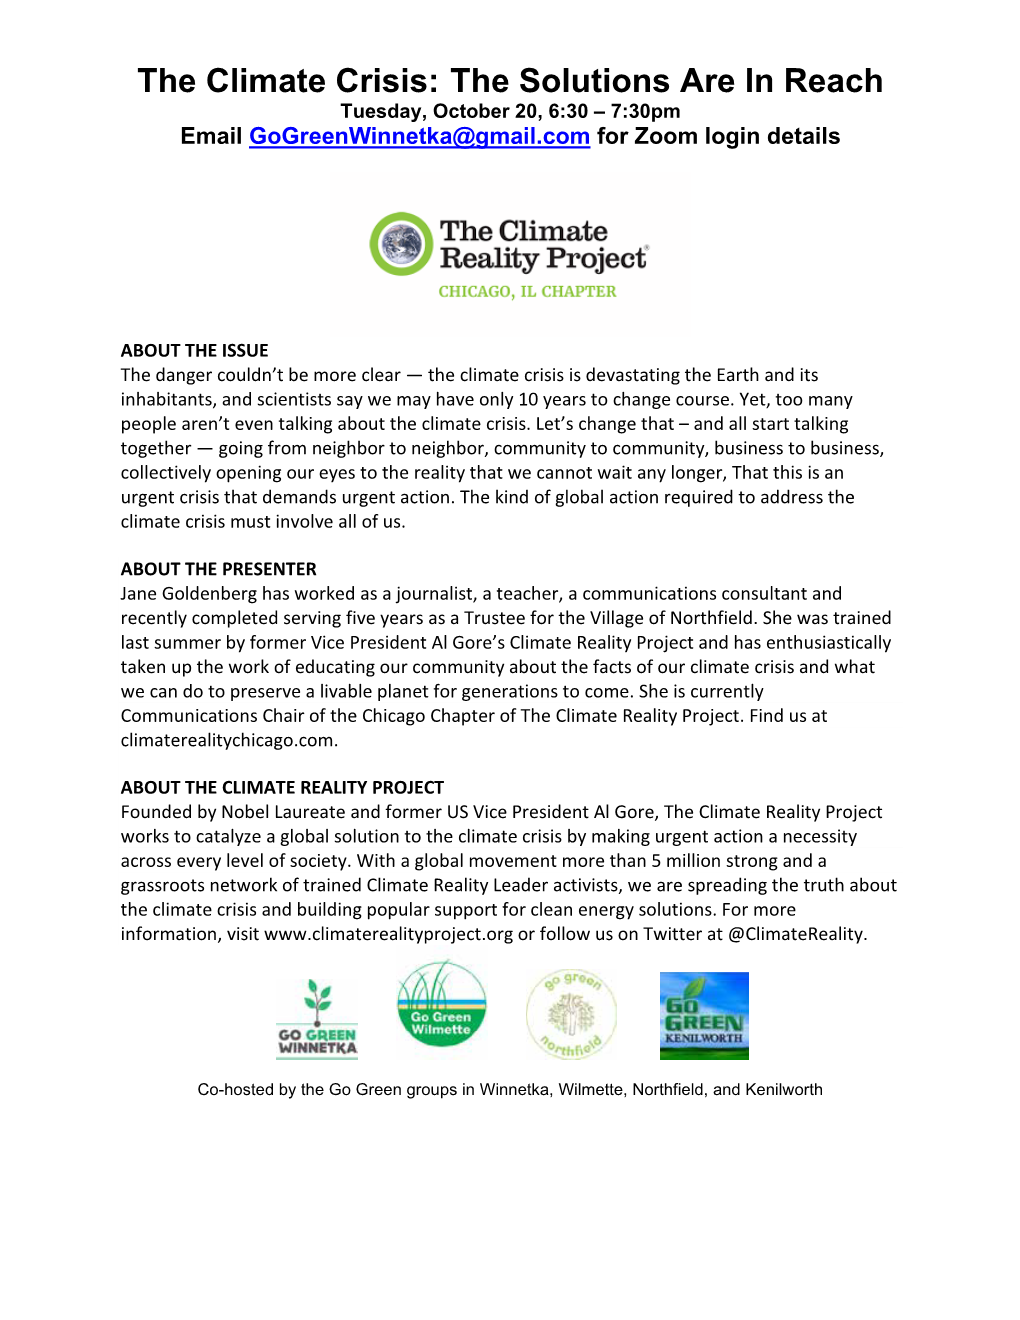 The Climate Crisis: the Solutions Are in Reach Tuesday, October 20, 6:30 – 7:30Pm Email Gogreenwinnetka@Gmail.Com for Zoom Login Details